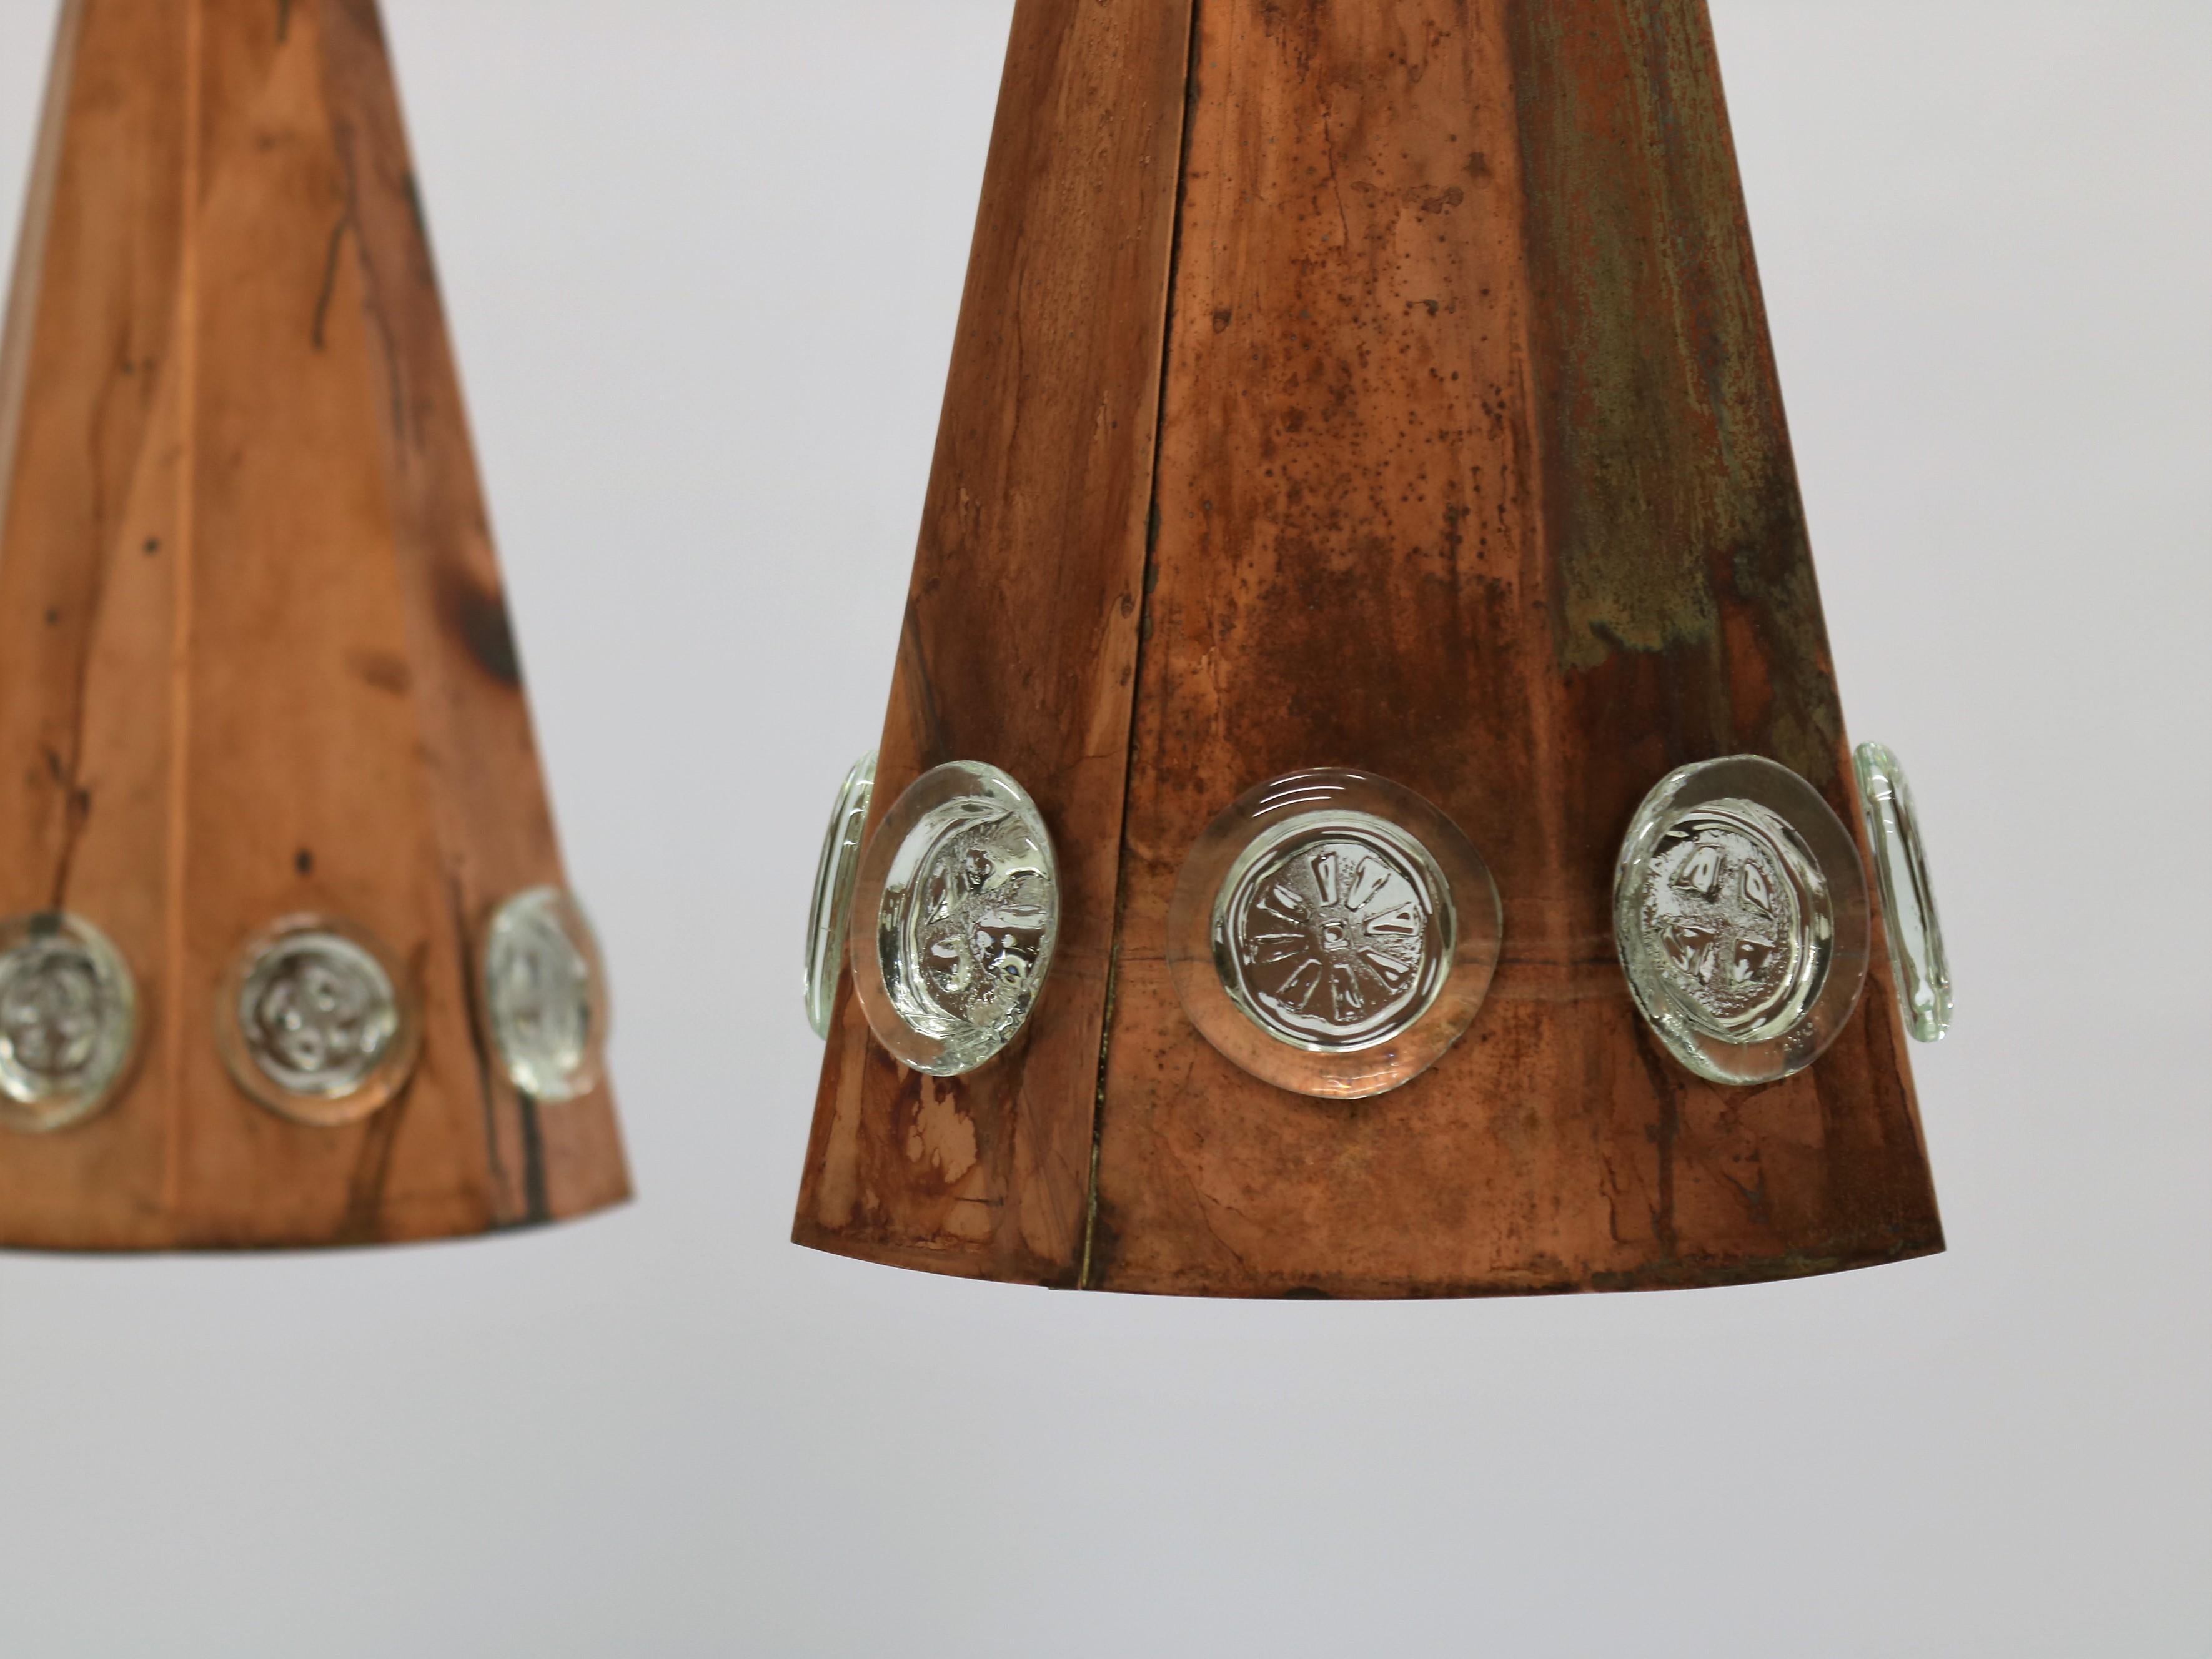 Set of 3 large conical shaped copper pendants with thick glass inserts made by Danish designer Svend Aage Holm Sorensen in the 1960s. Great example of Scandinavian modernism in the Brutalist style.